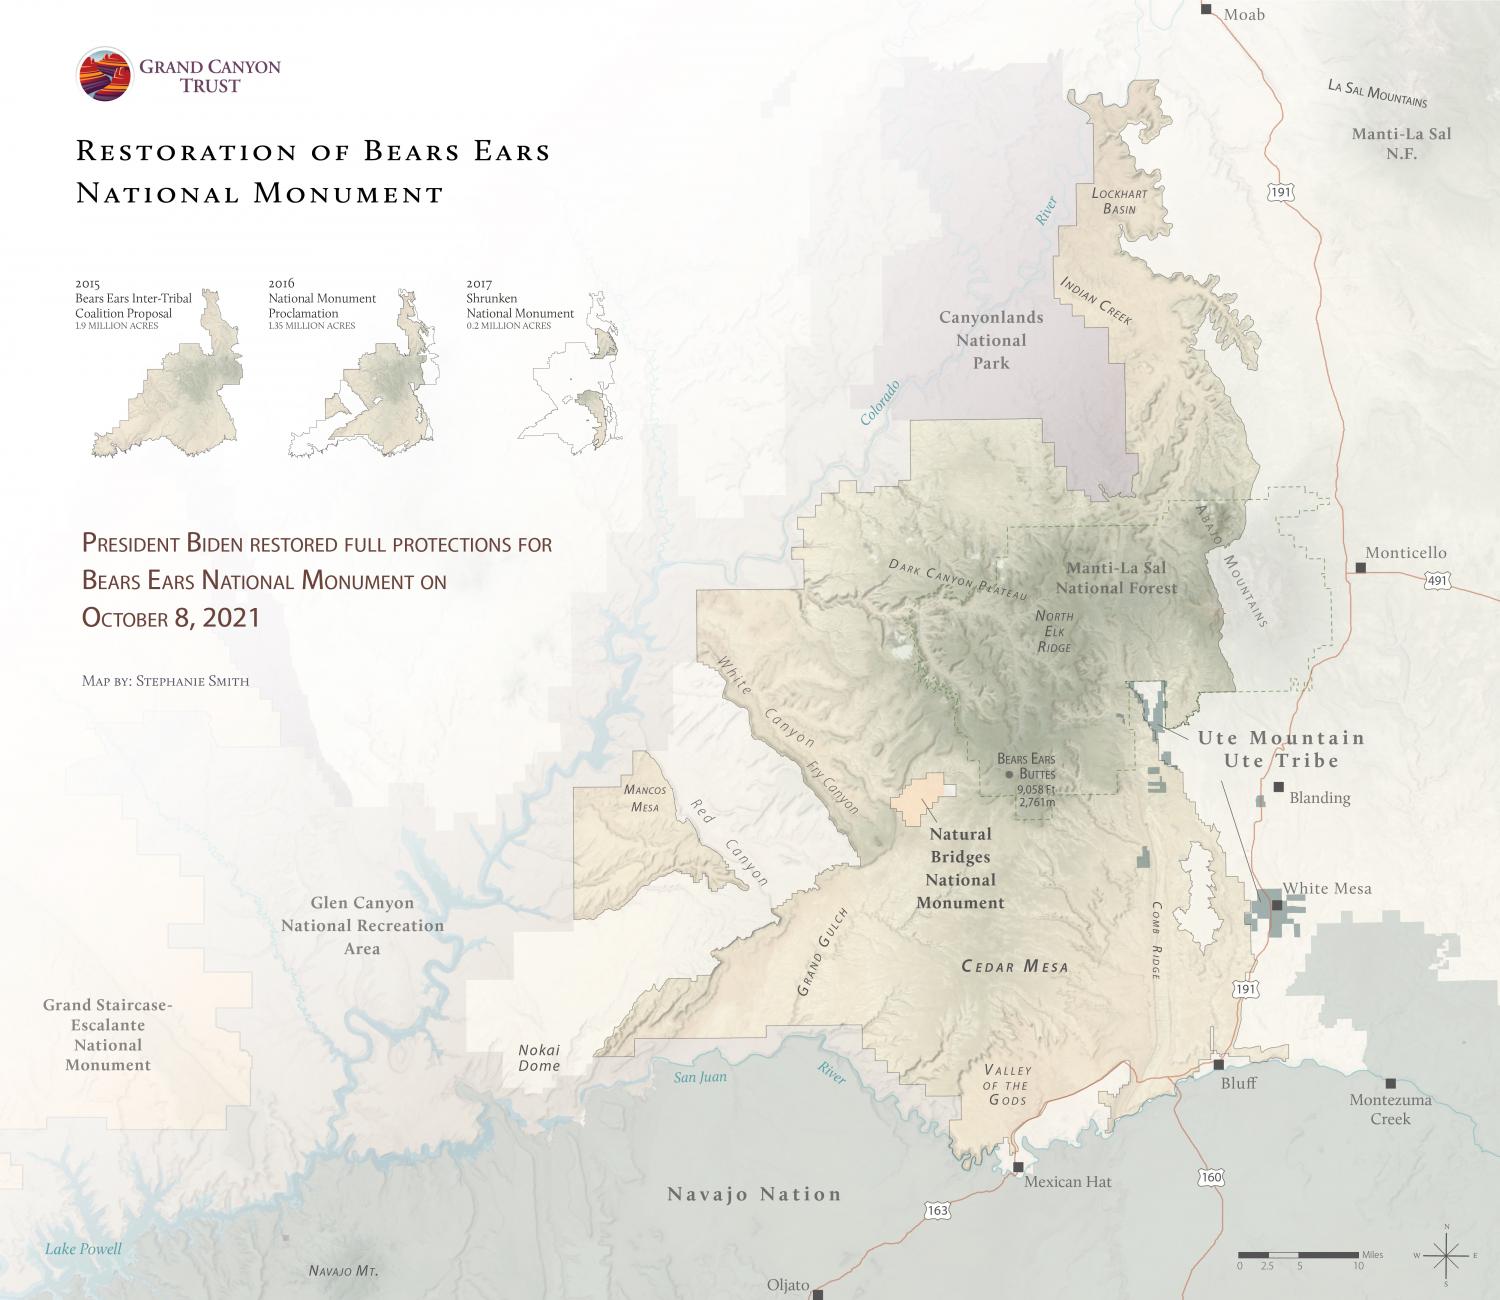 Restoration of Bears Ears National Monument Map